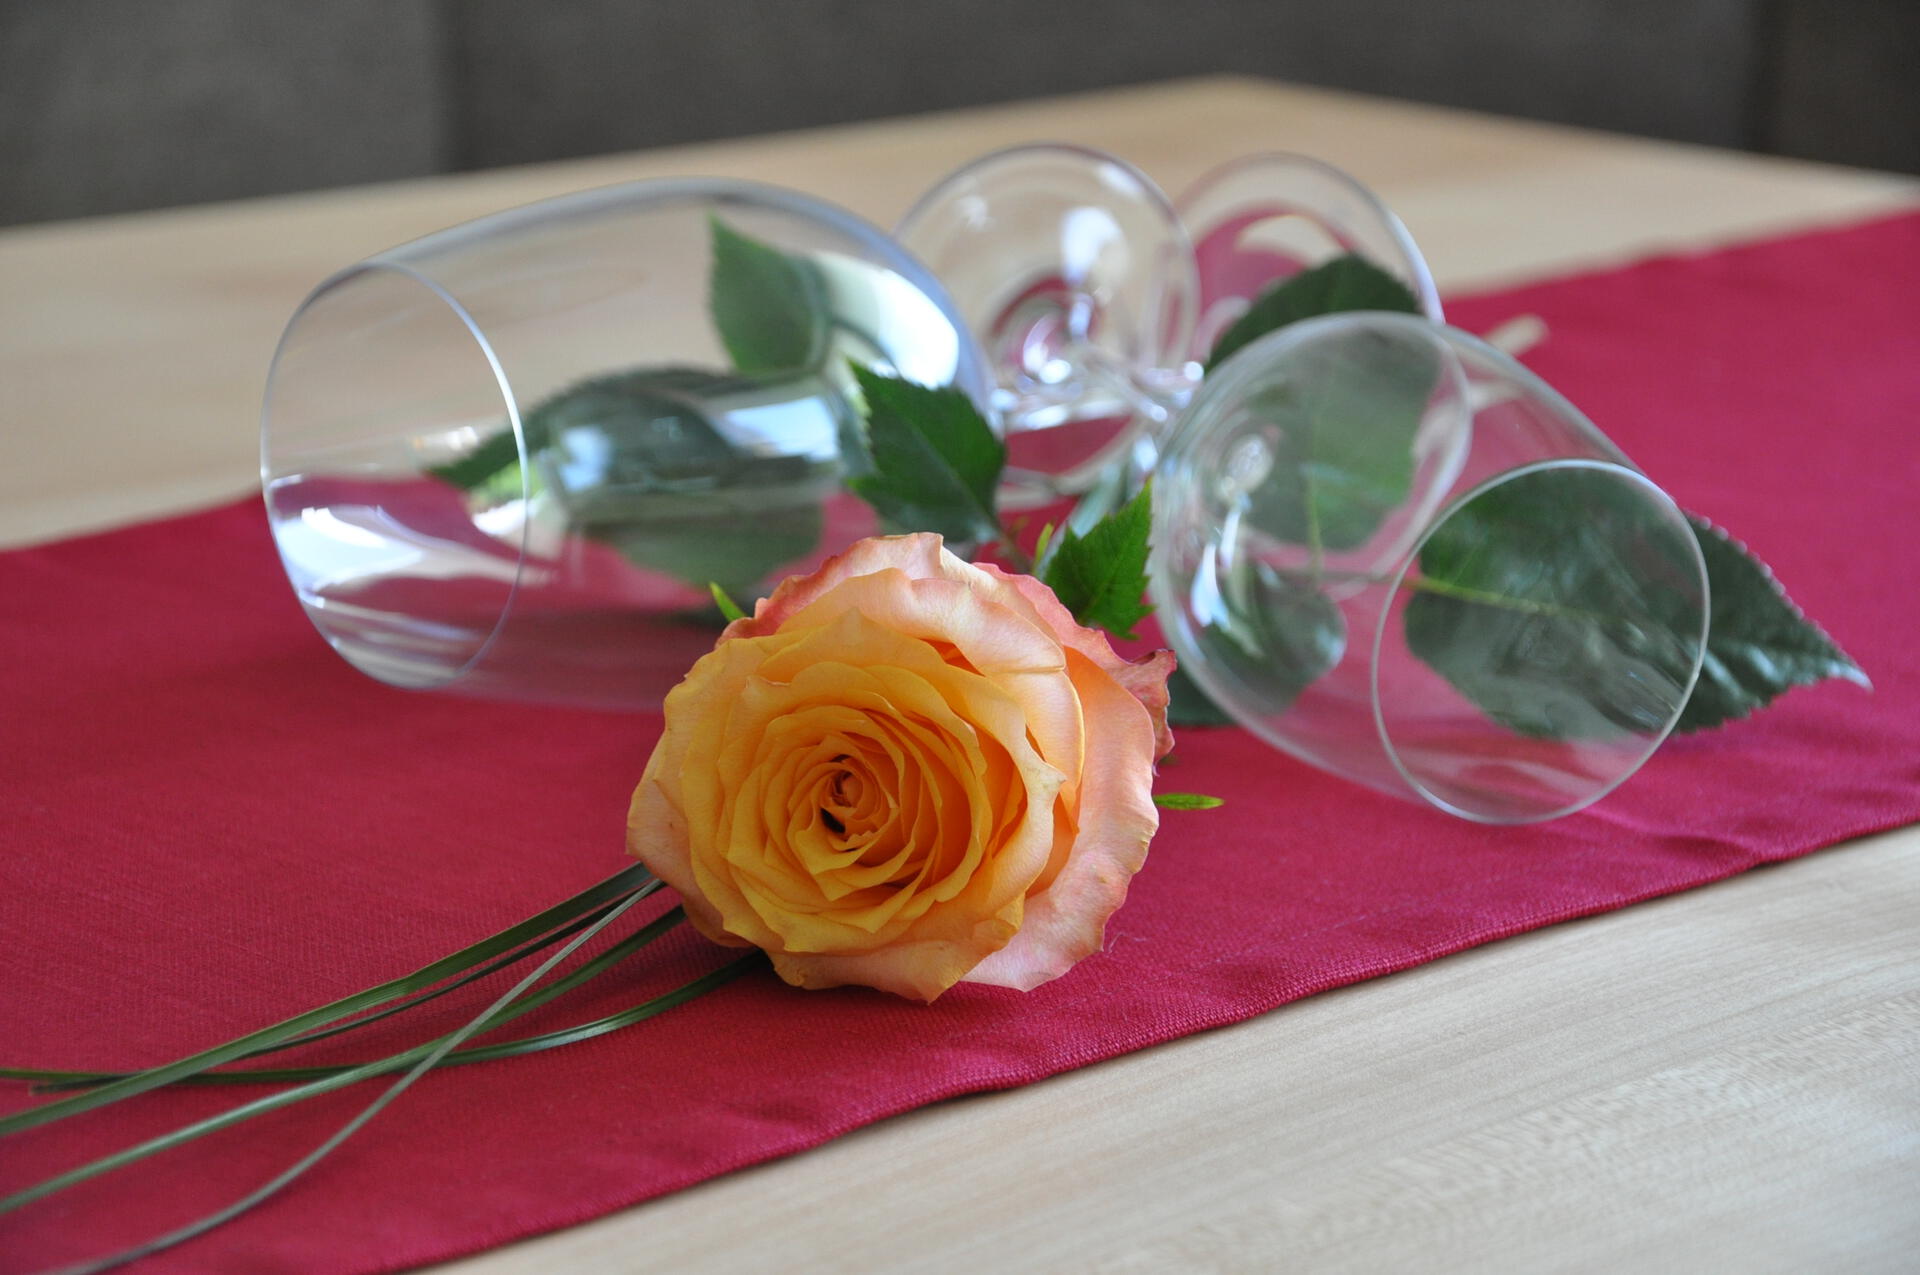 Wine glasses with rose